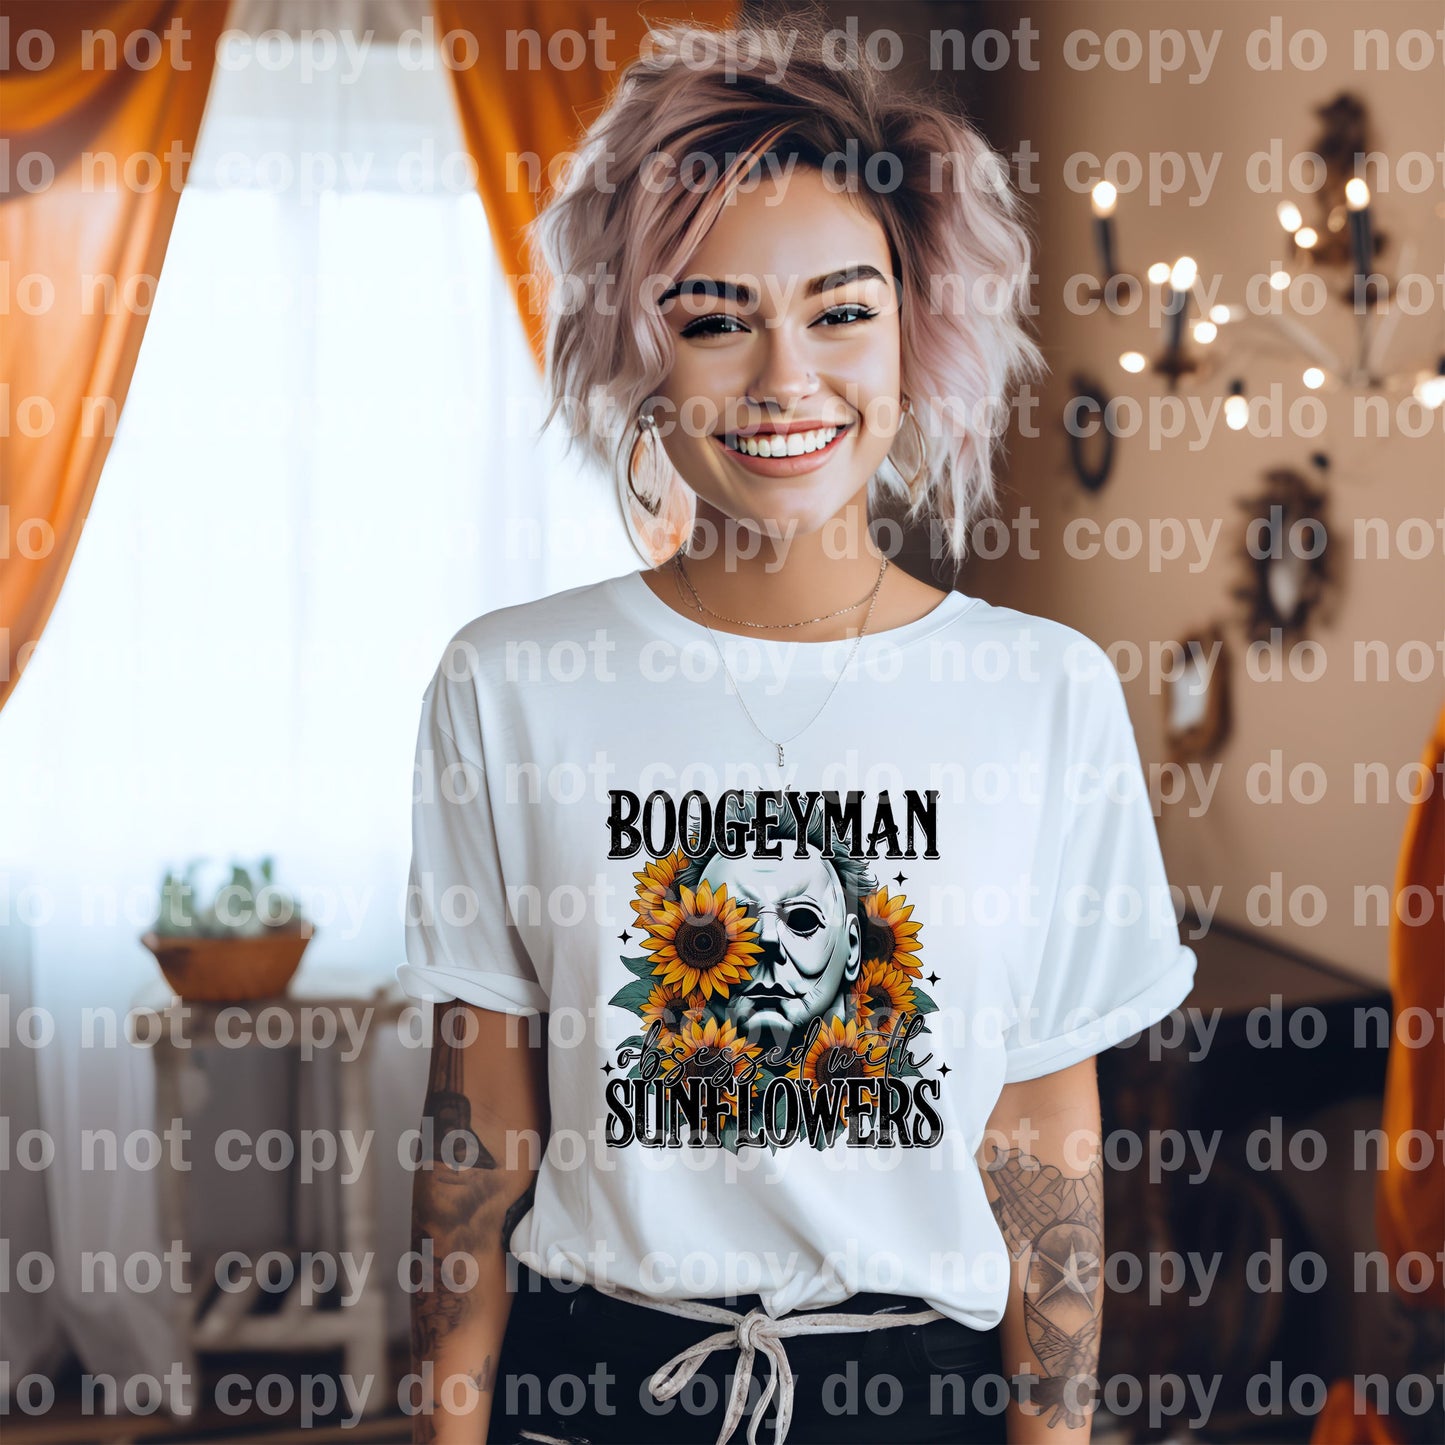 Boogeyman Obsessed with Sunflowers